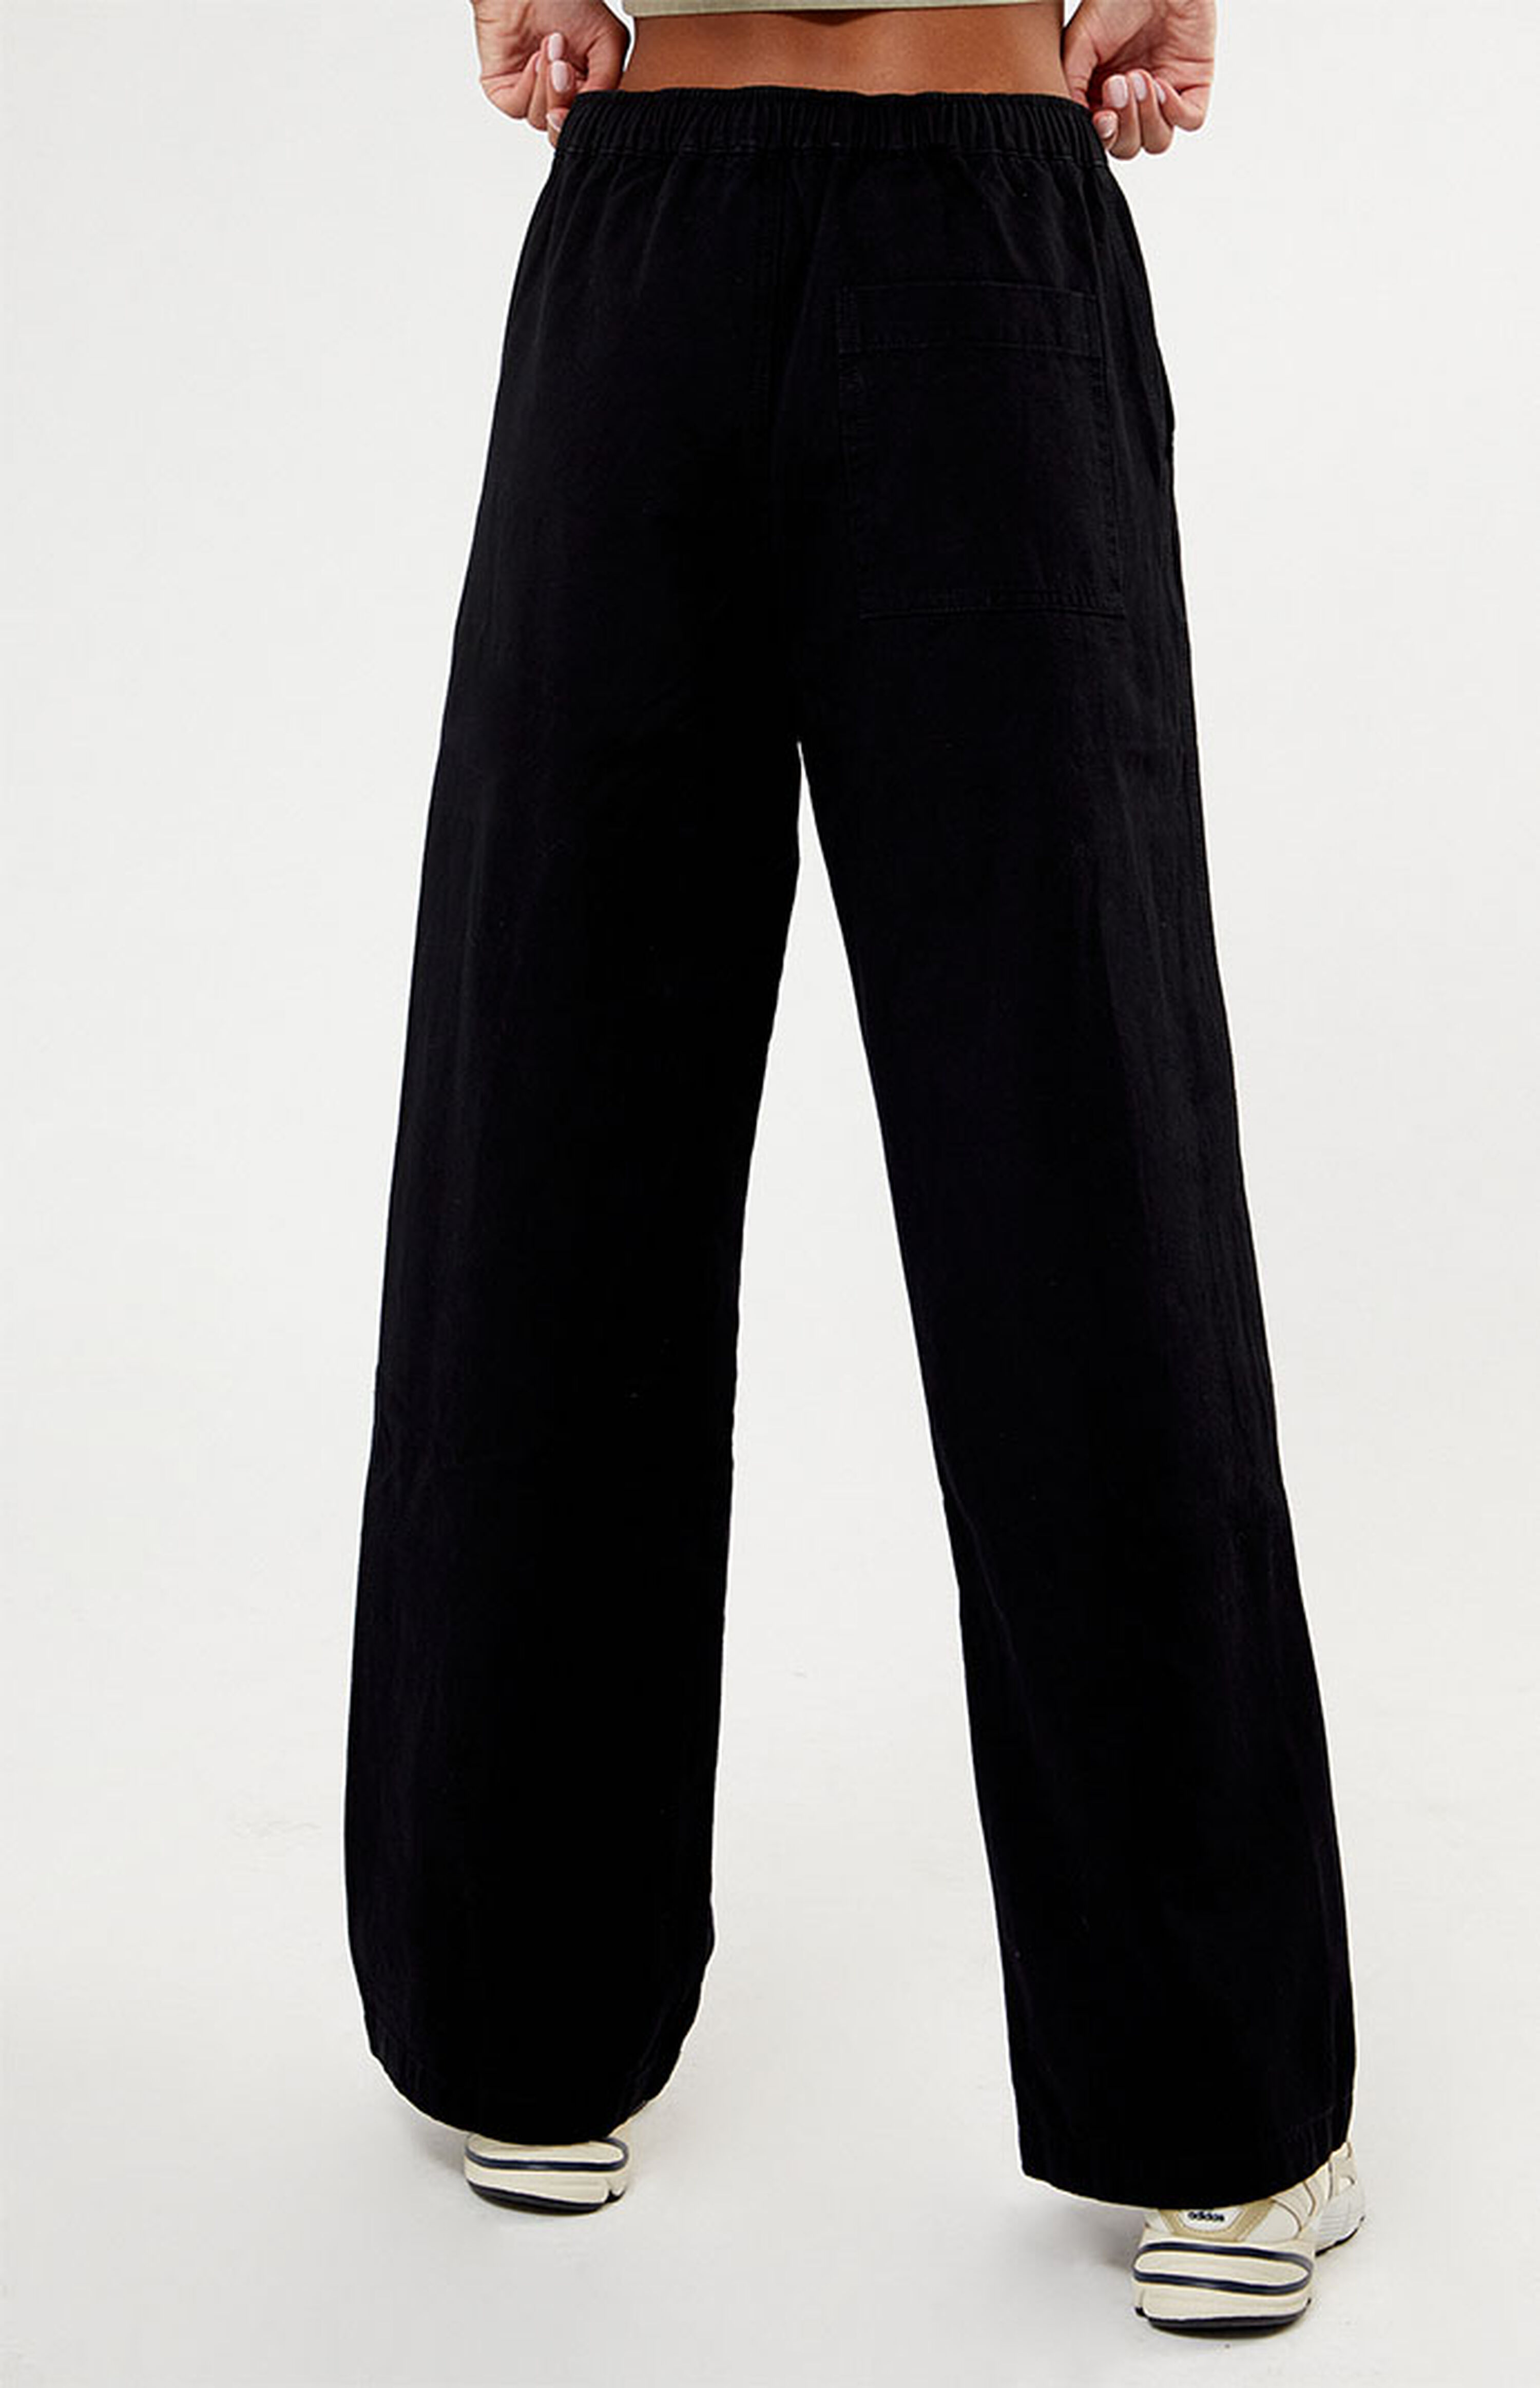 PacSun Soft Twill Pull-On Pants | PacSun